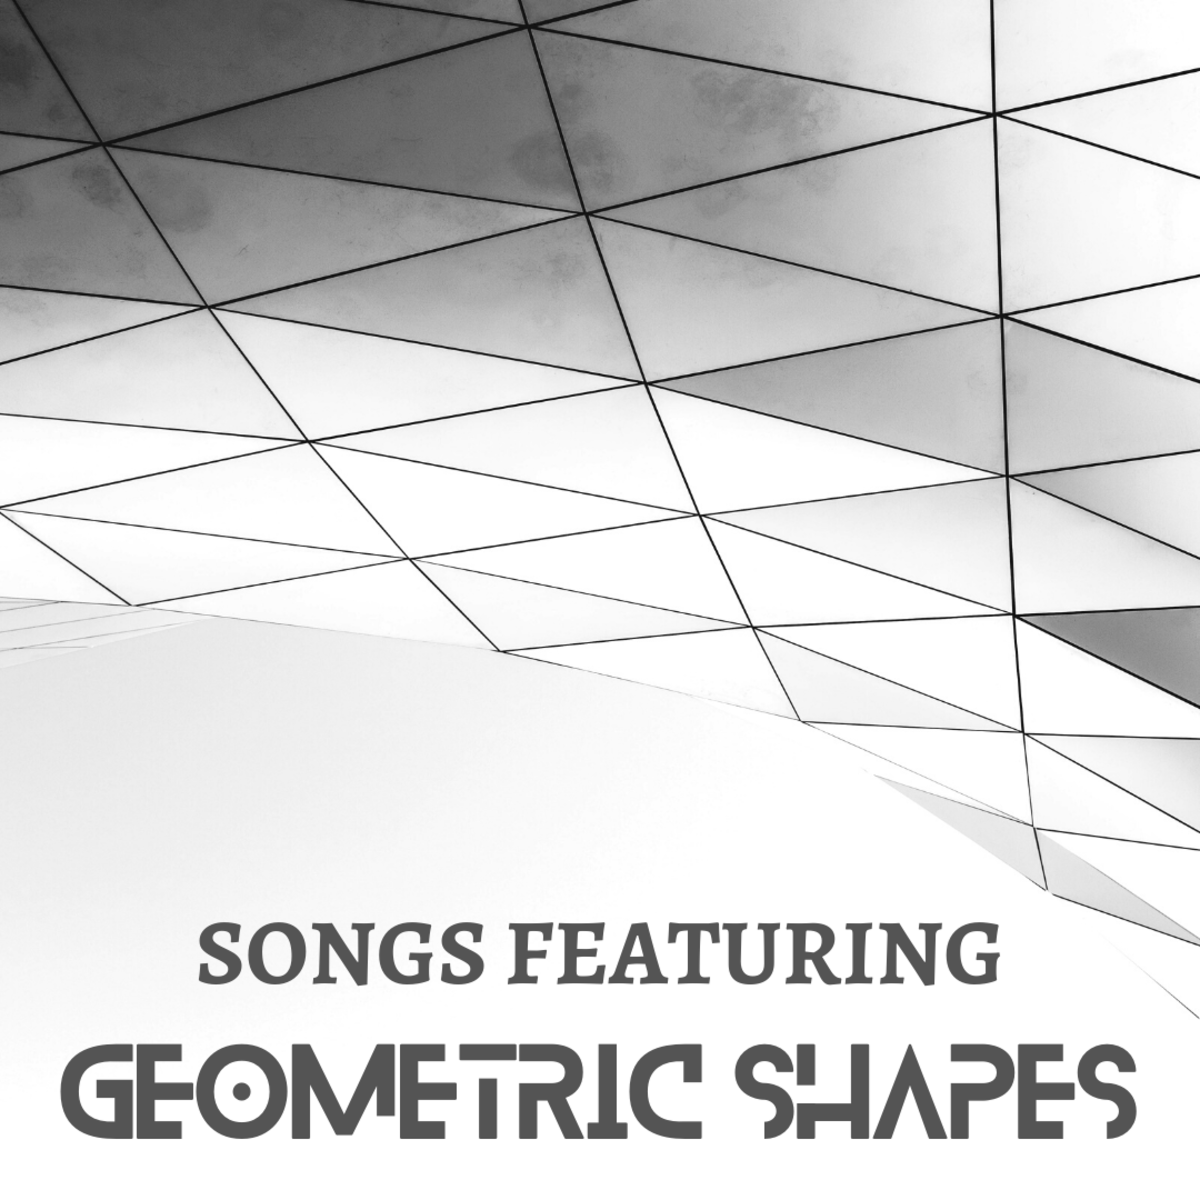 100 Best Songs With Geometric Shapes in the Title